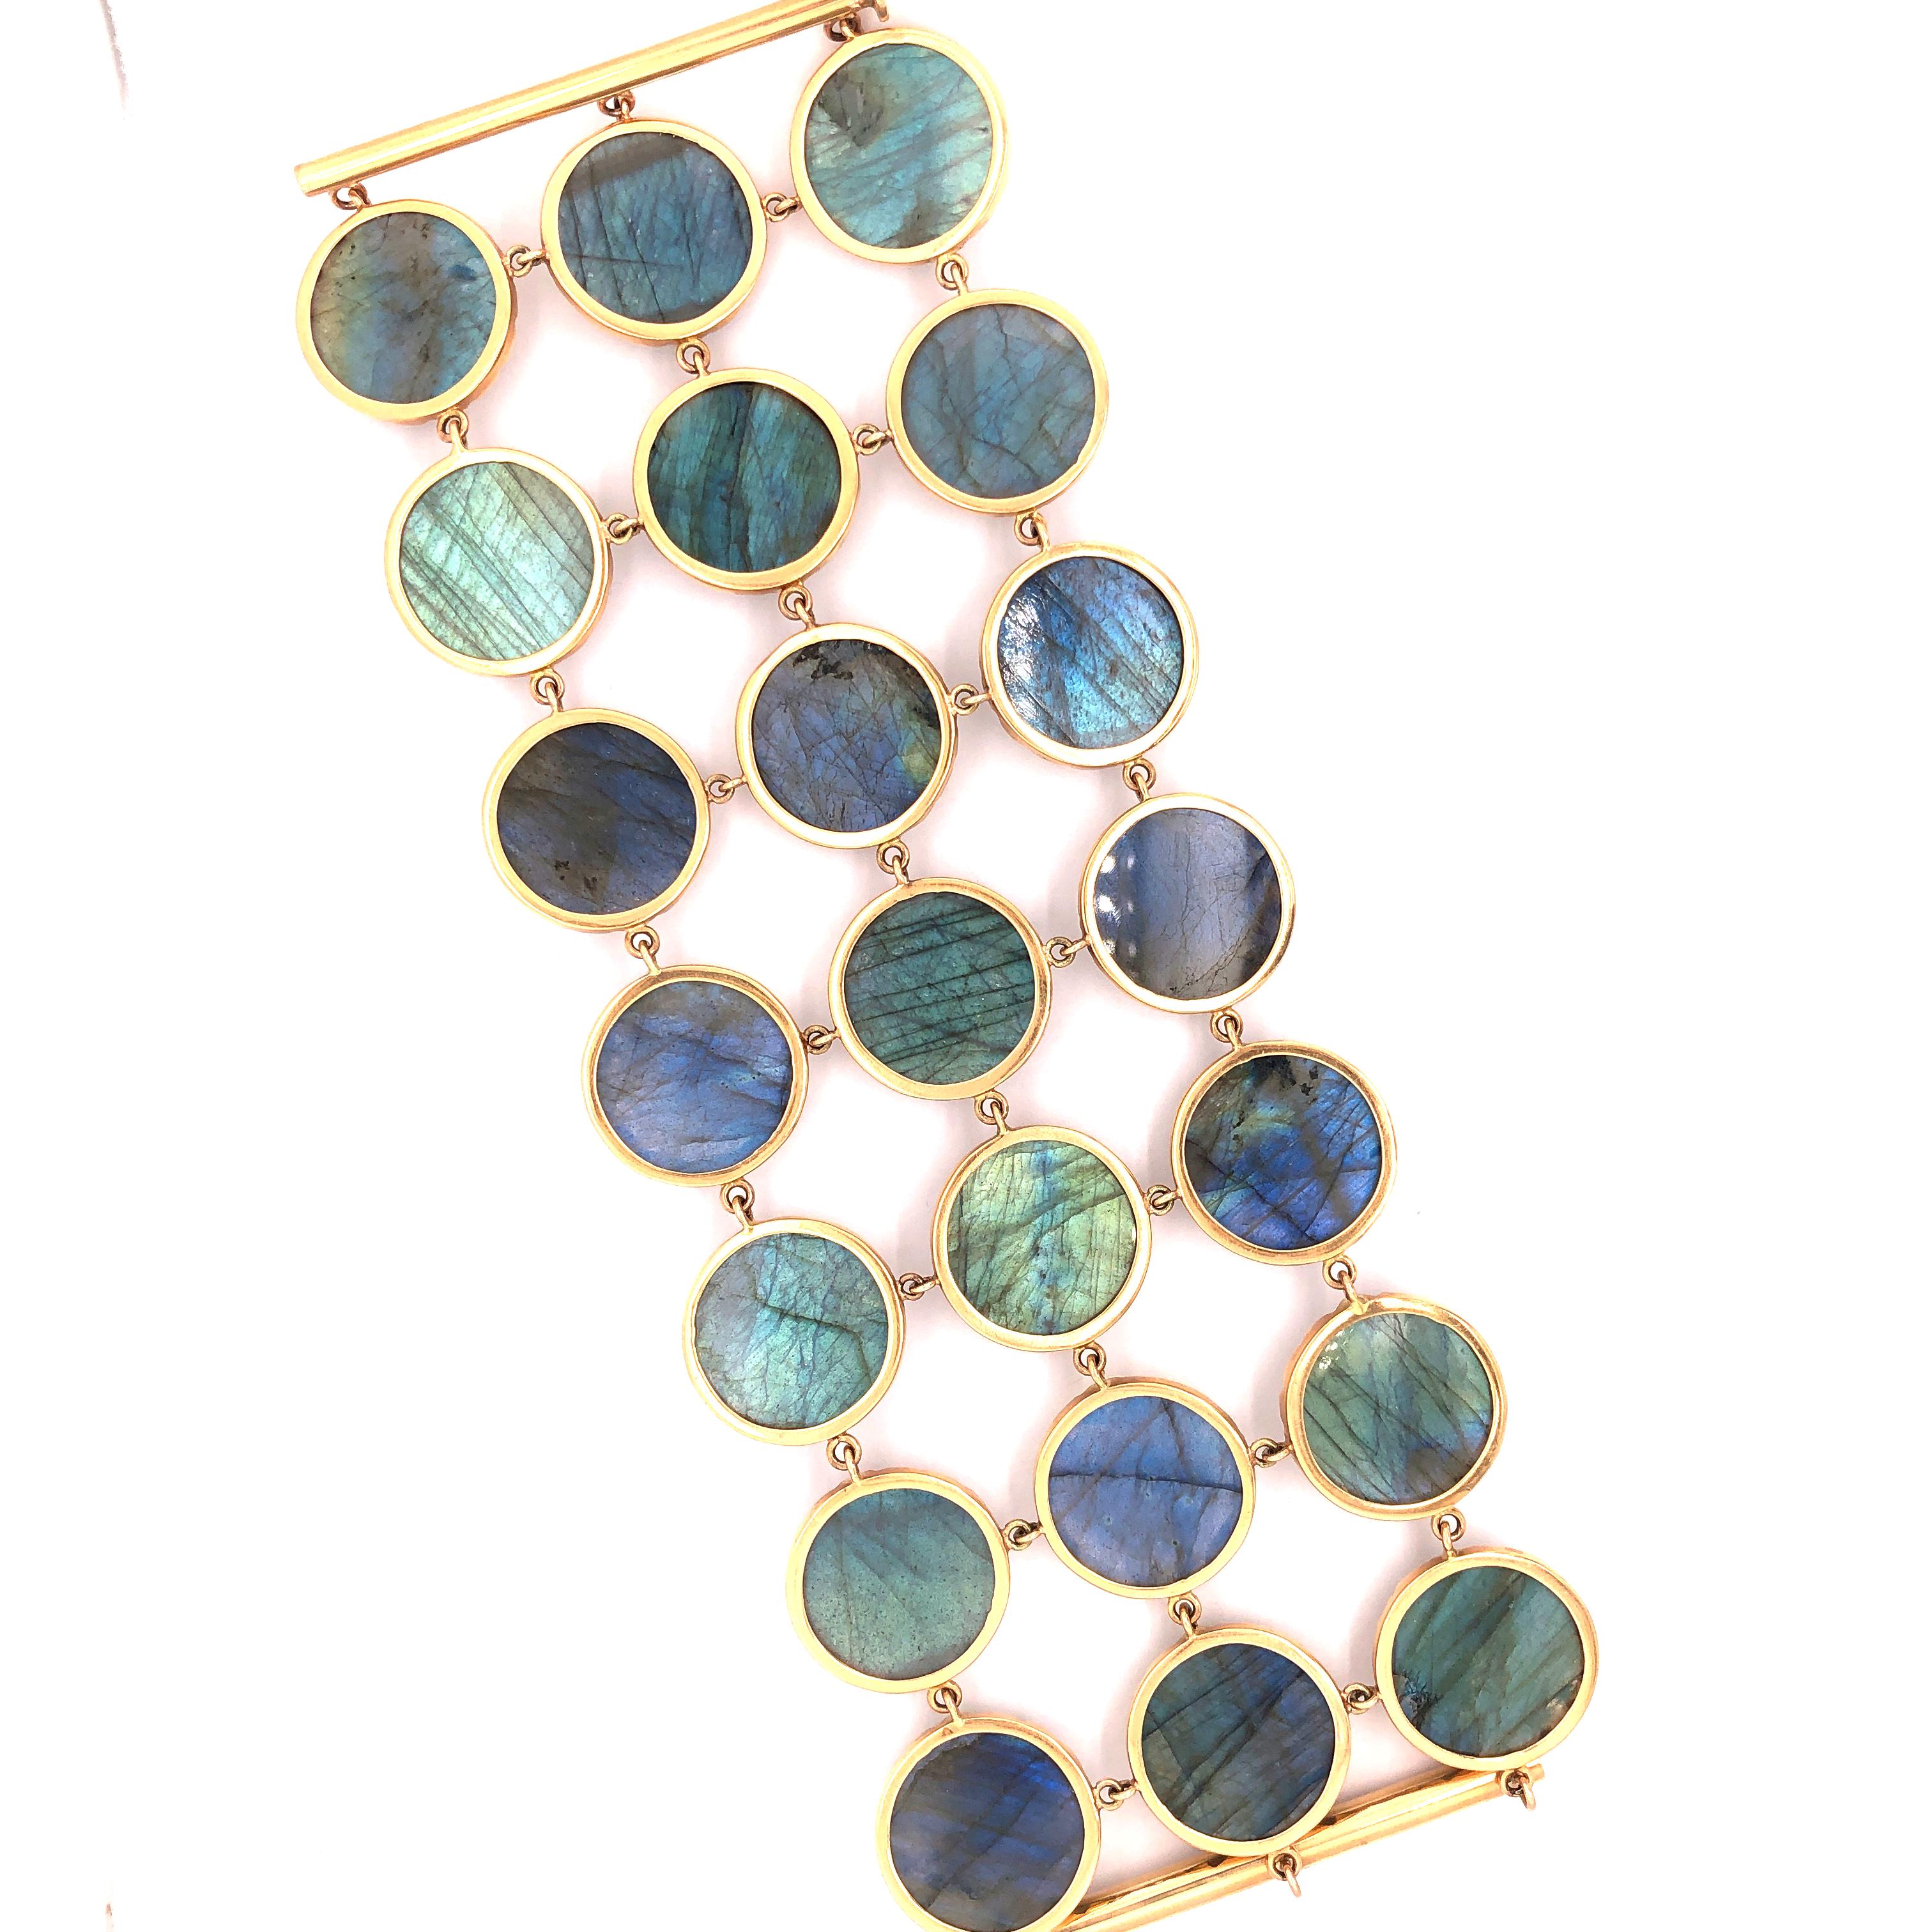 Broad Beautiful Labradorite Bracelet set in 18K Rose Gold. Wear this bracelet to your most important event and never be forgotten. Each stone is handcut and very finely covered with gold bezel on sides with a triangle motif. It is a slide in